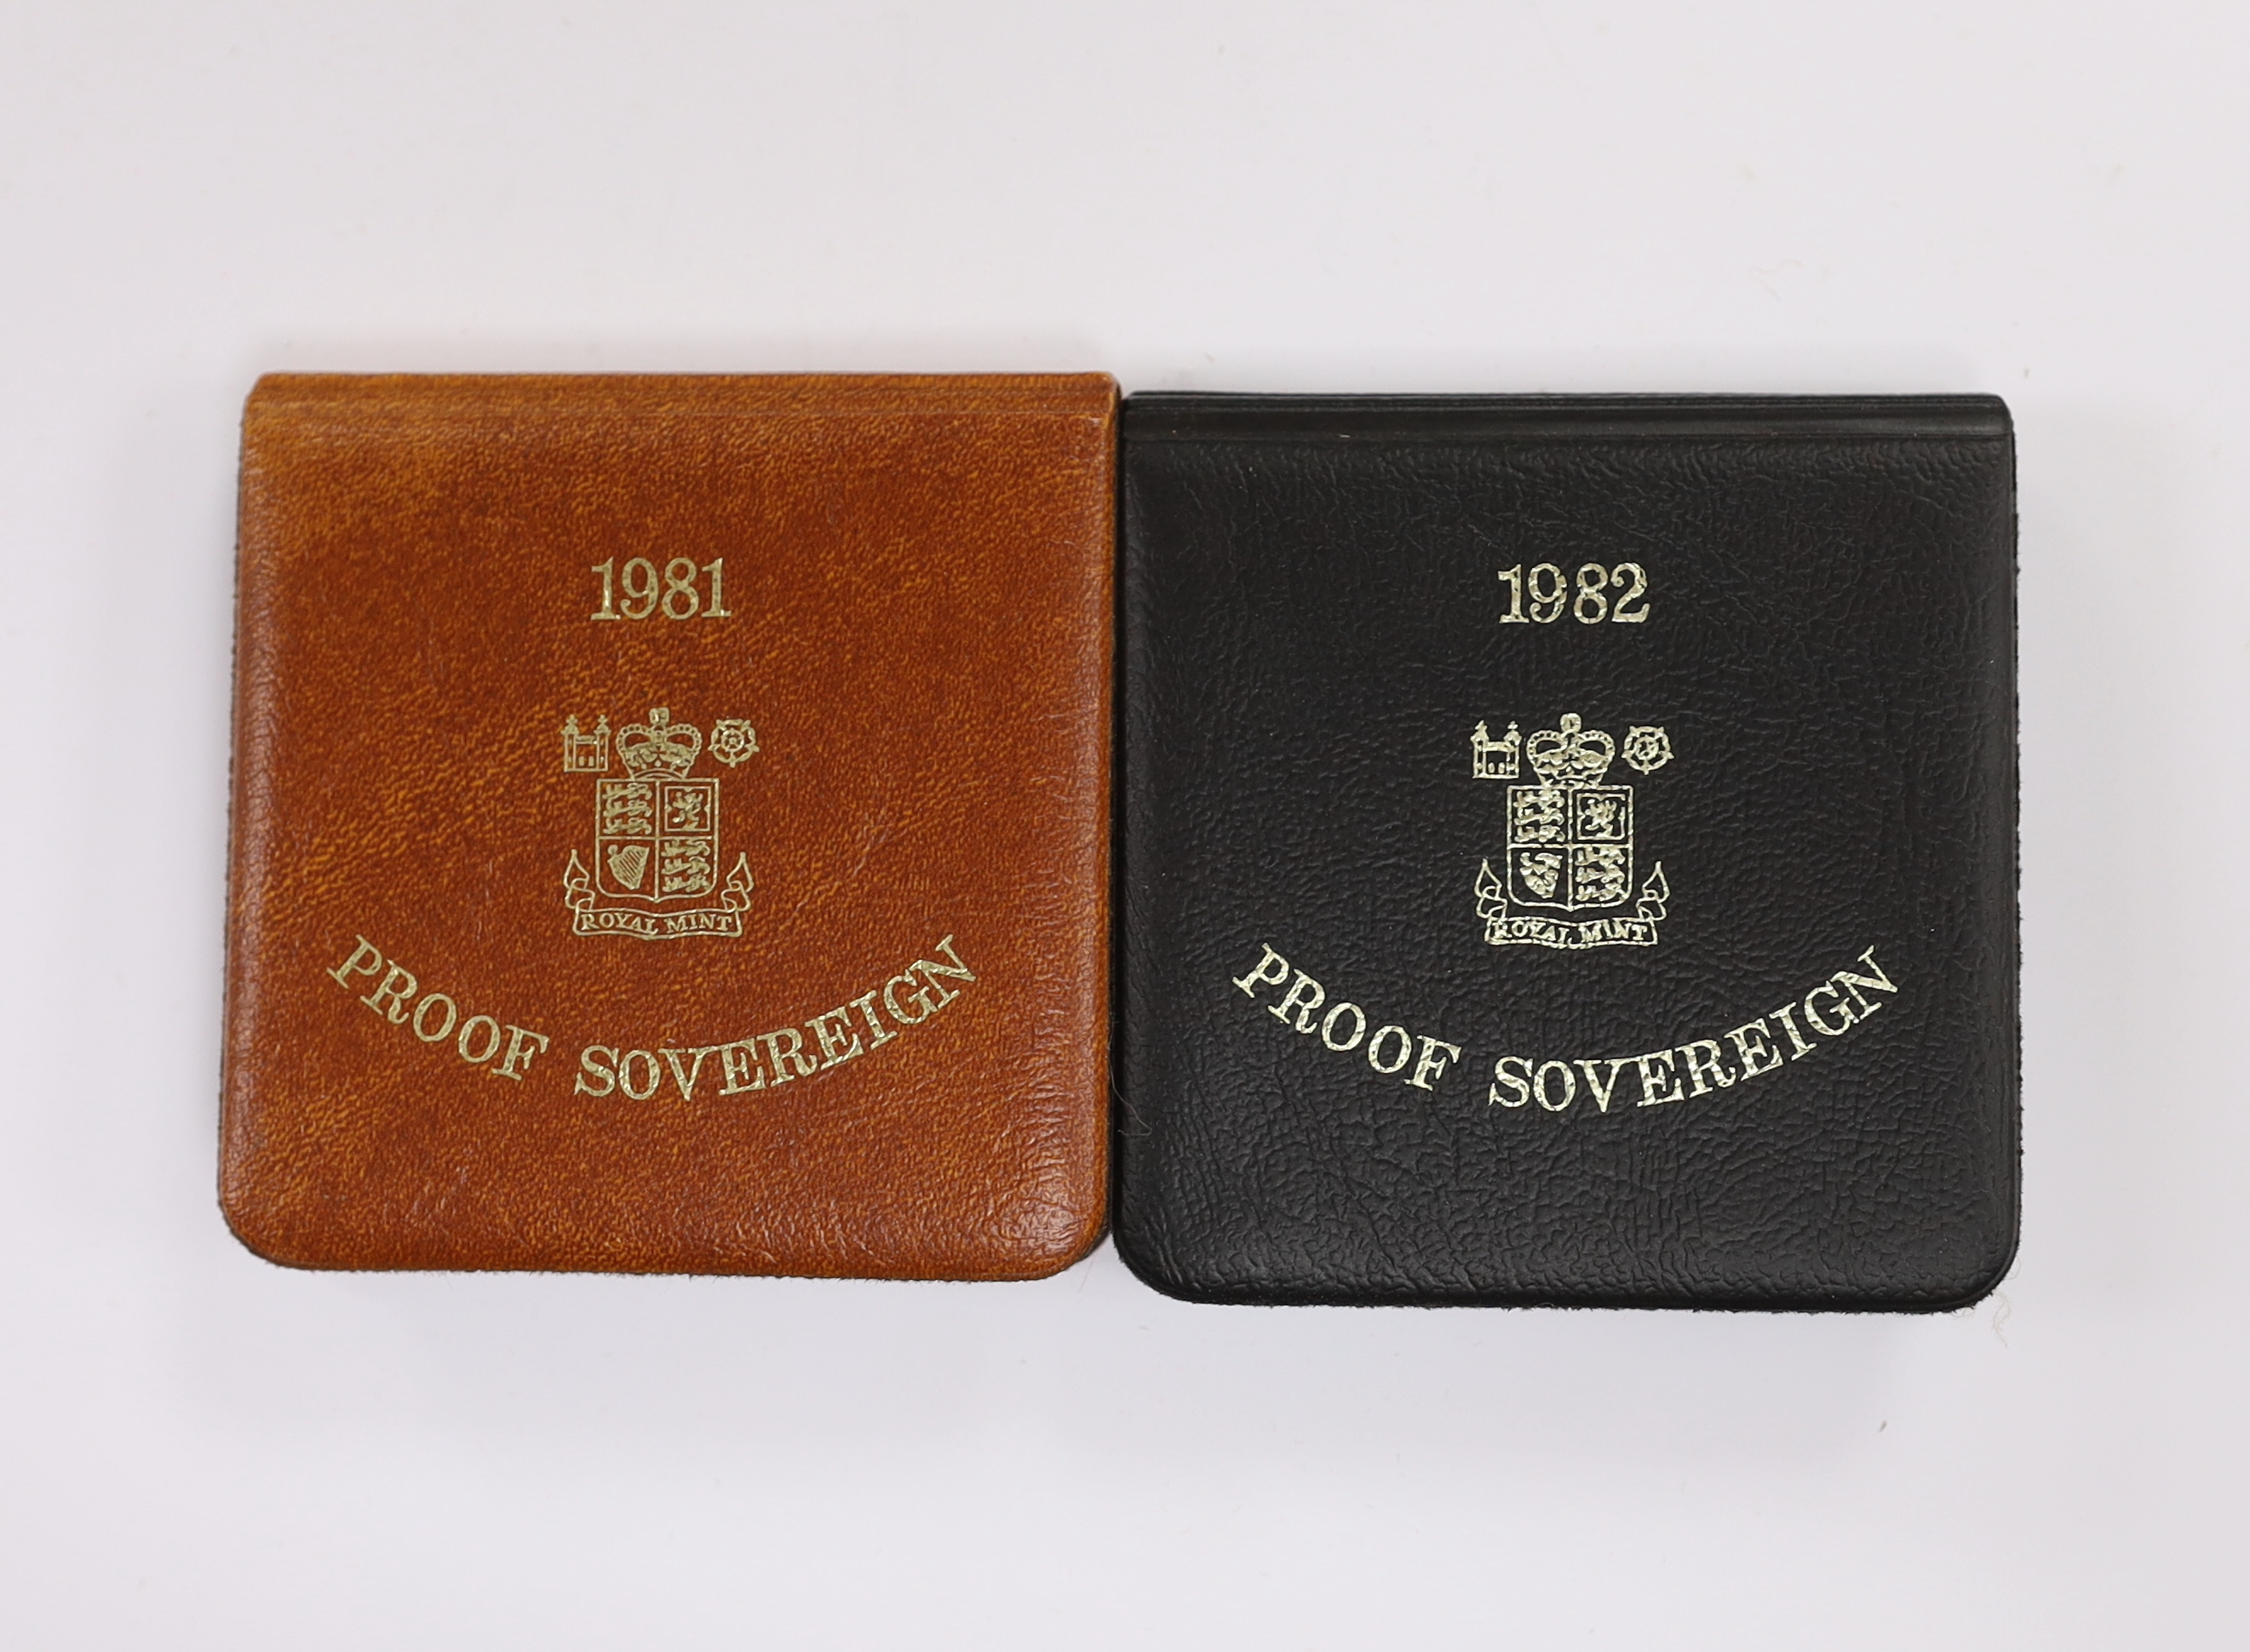 British gold coins - Two Royal Mint QEII Gold Proof Sovereigns, 1981 and 1982, both in case of issue with paperwork